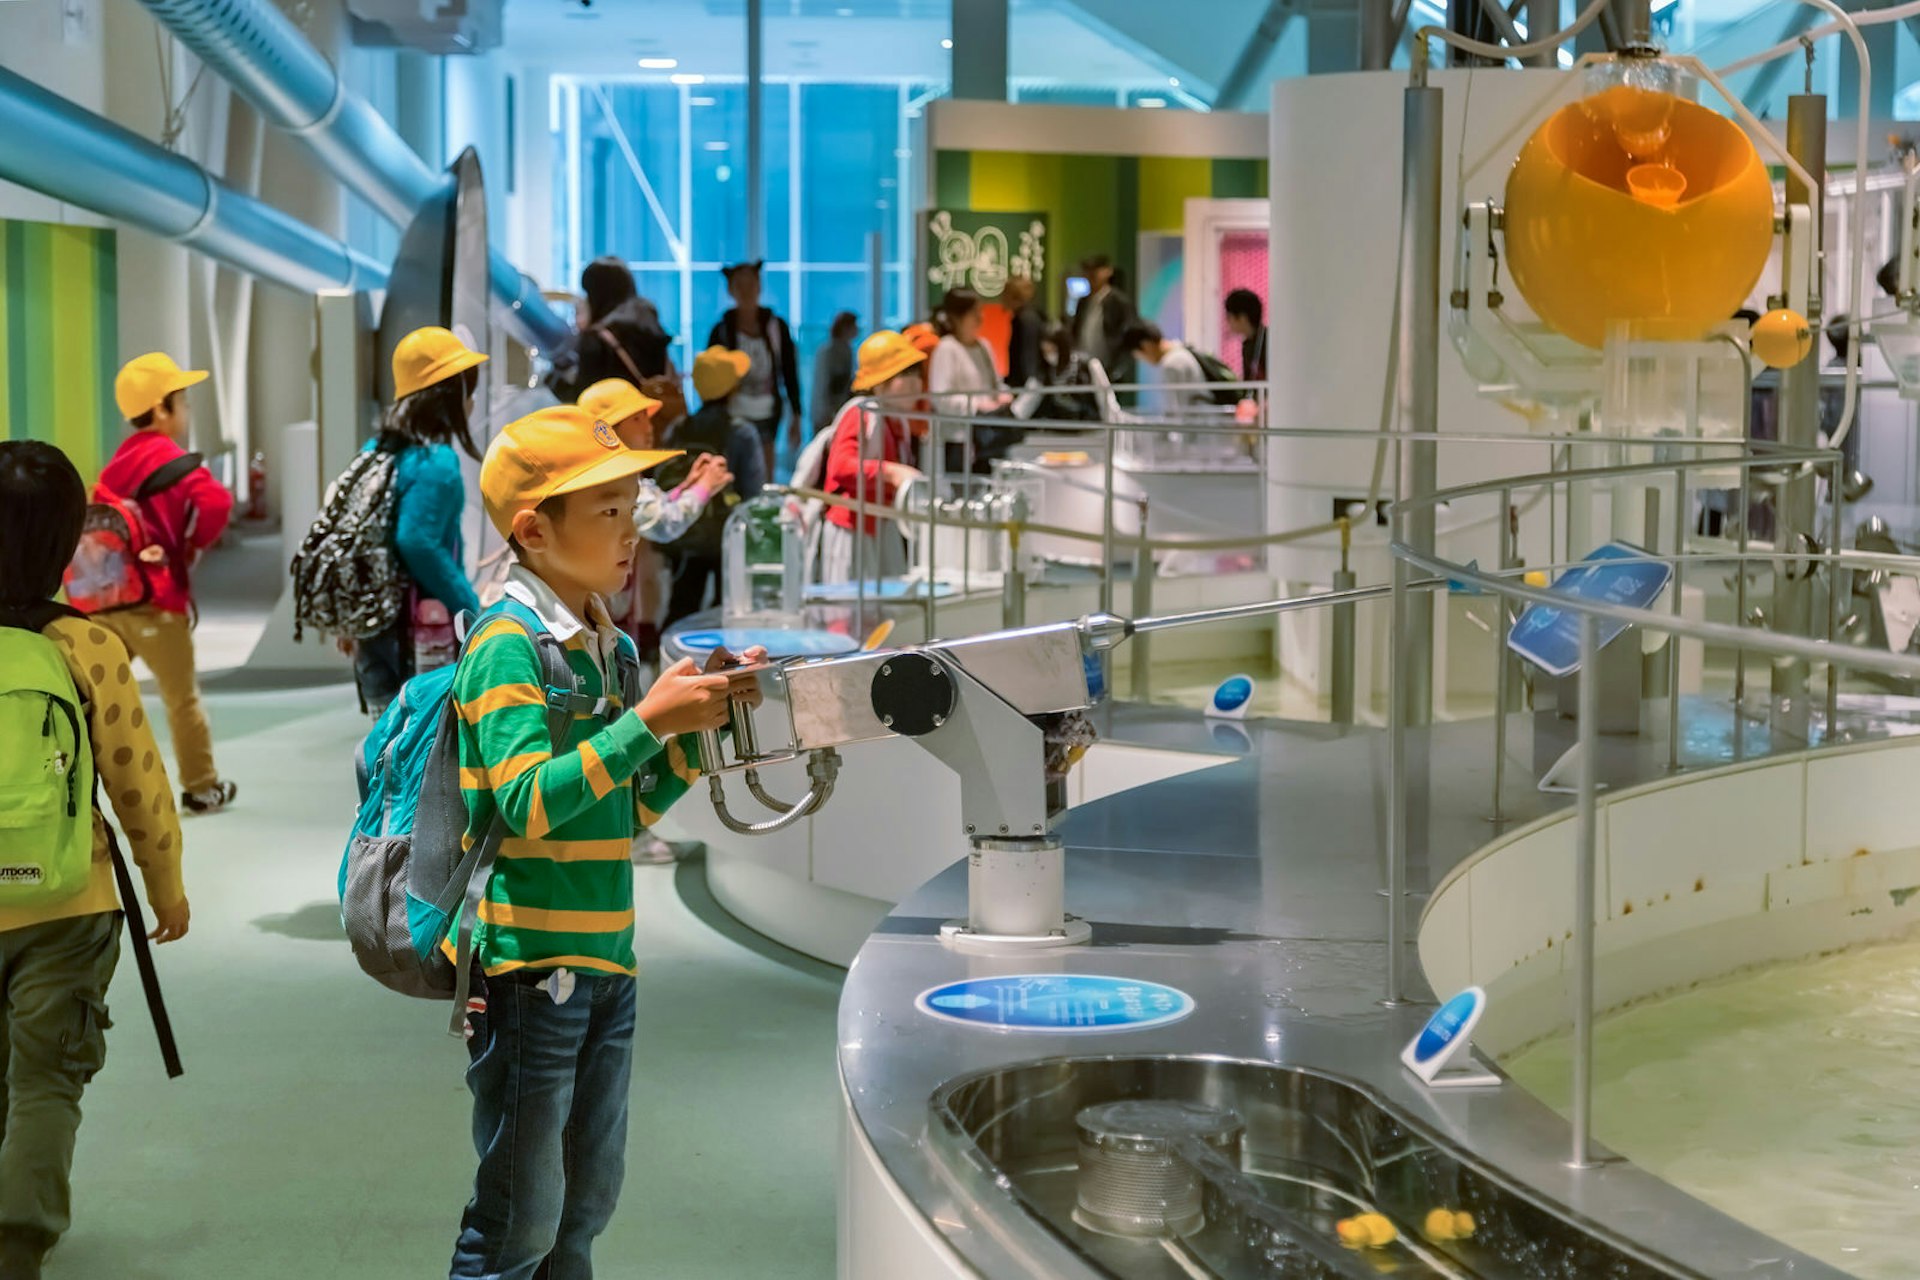 A school-age child plays with a hands-on exhibit, shooting water into a pool at the museum